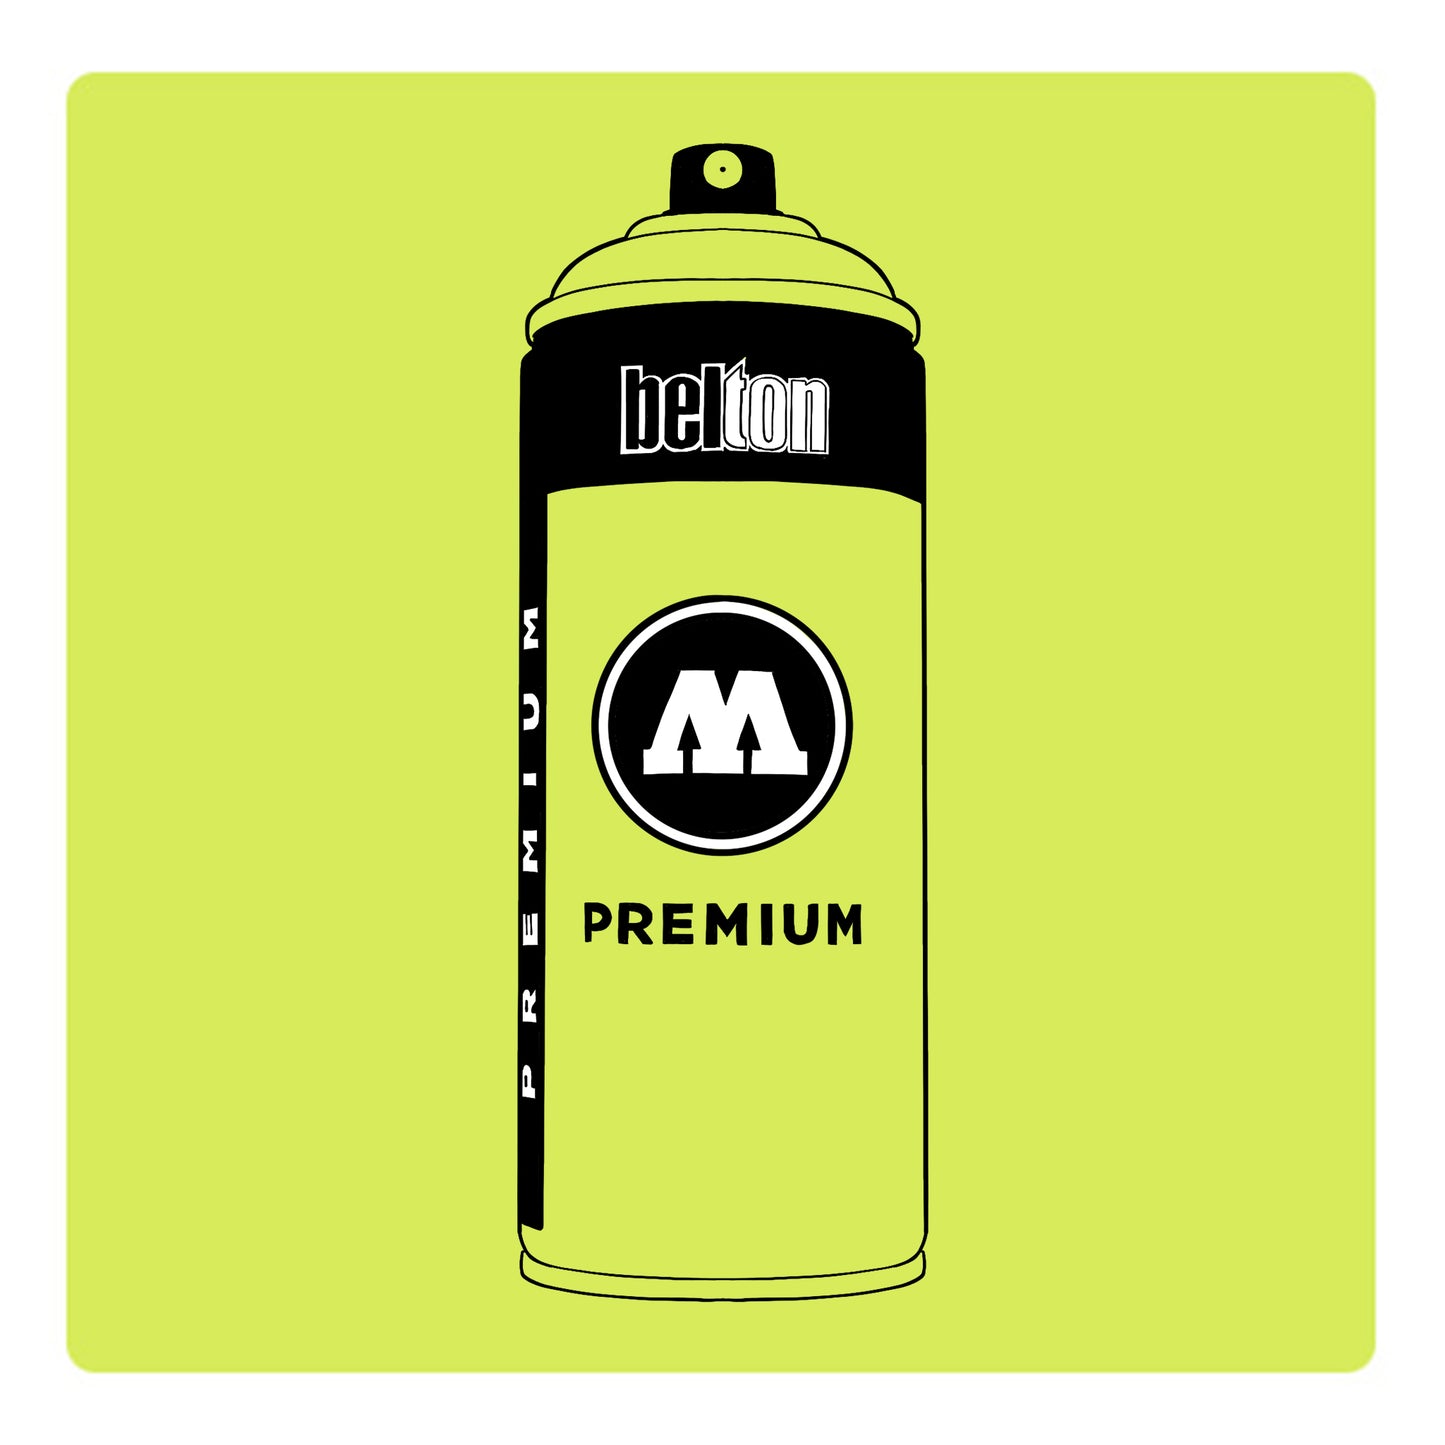 A black outline drawing of a highlighter yellow spray paint can with the words "belton","premium" and the letter"M" written on the face in black and white font. The background is a color swatch of the same highlighter yellow with a white border